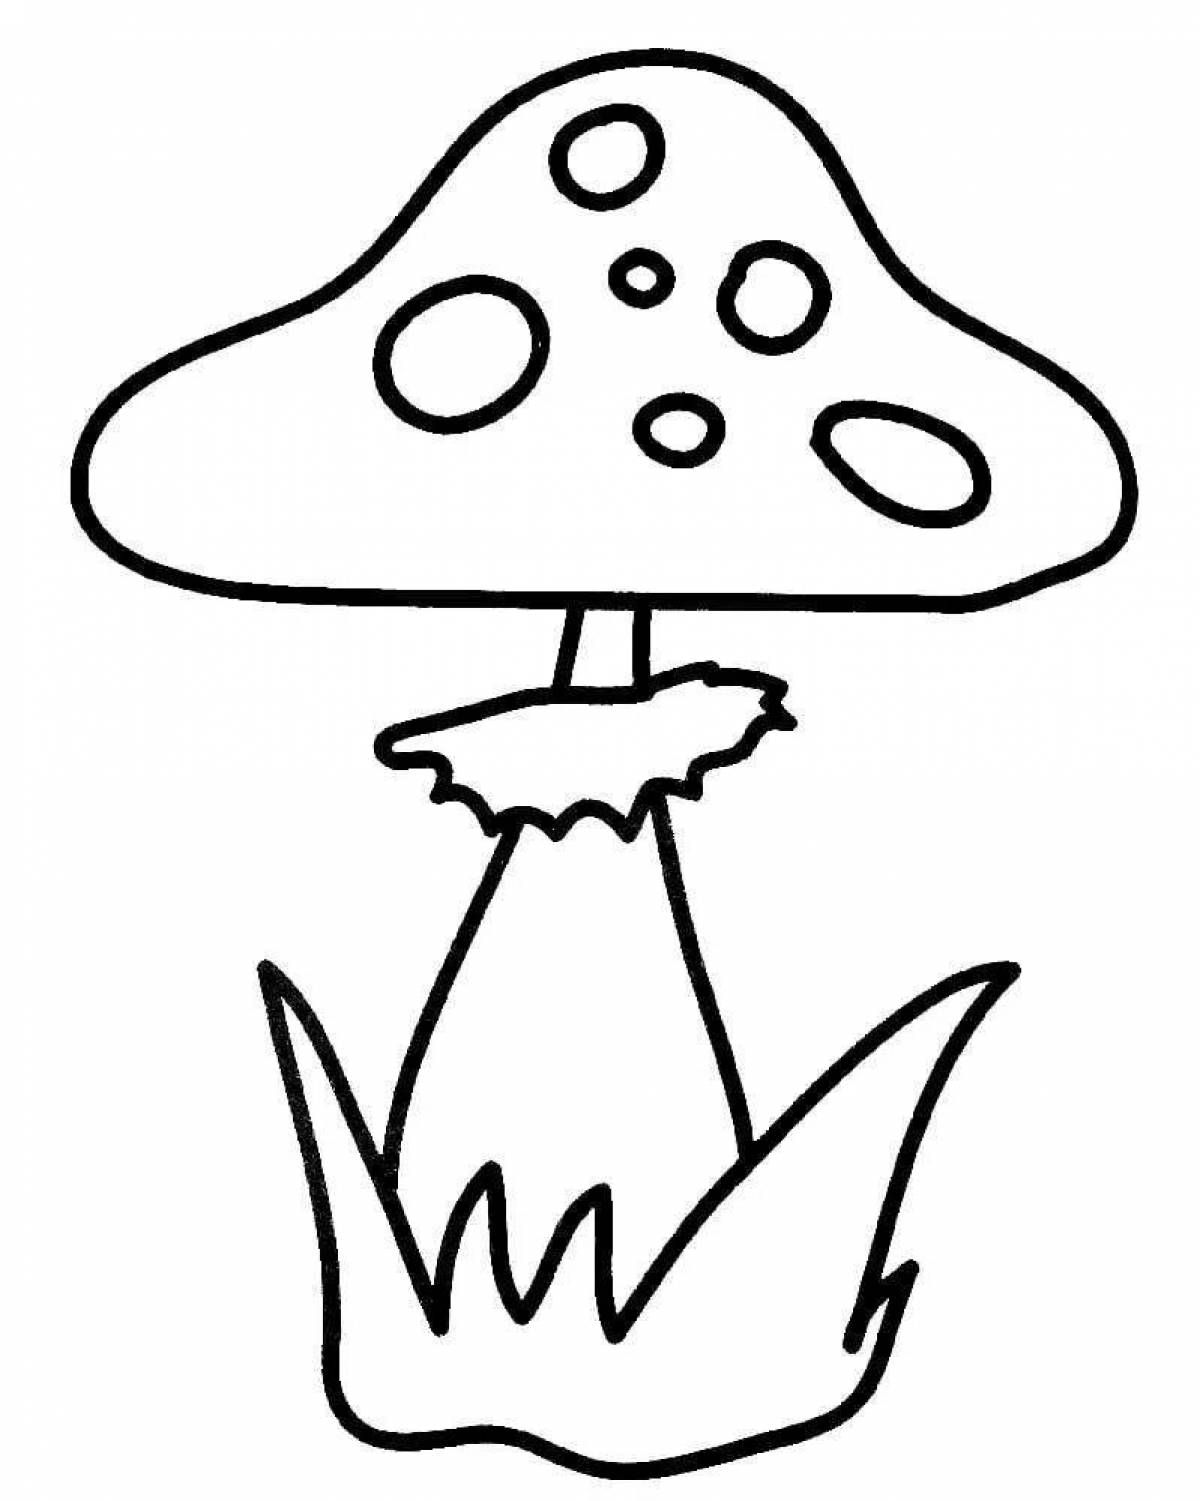 Colouring peaceful red fly agaric